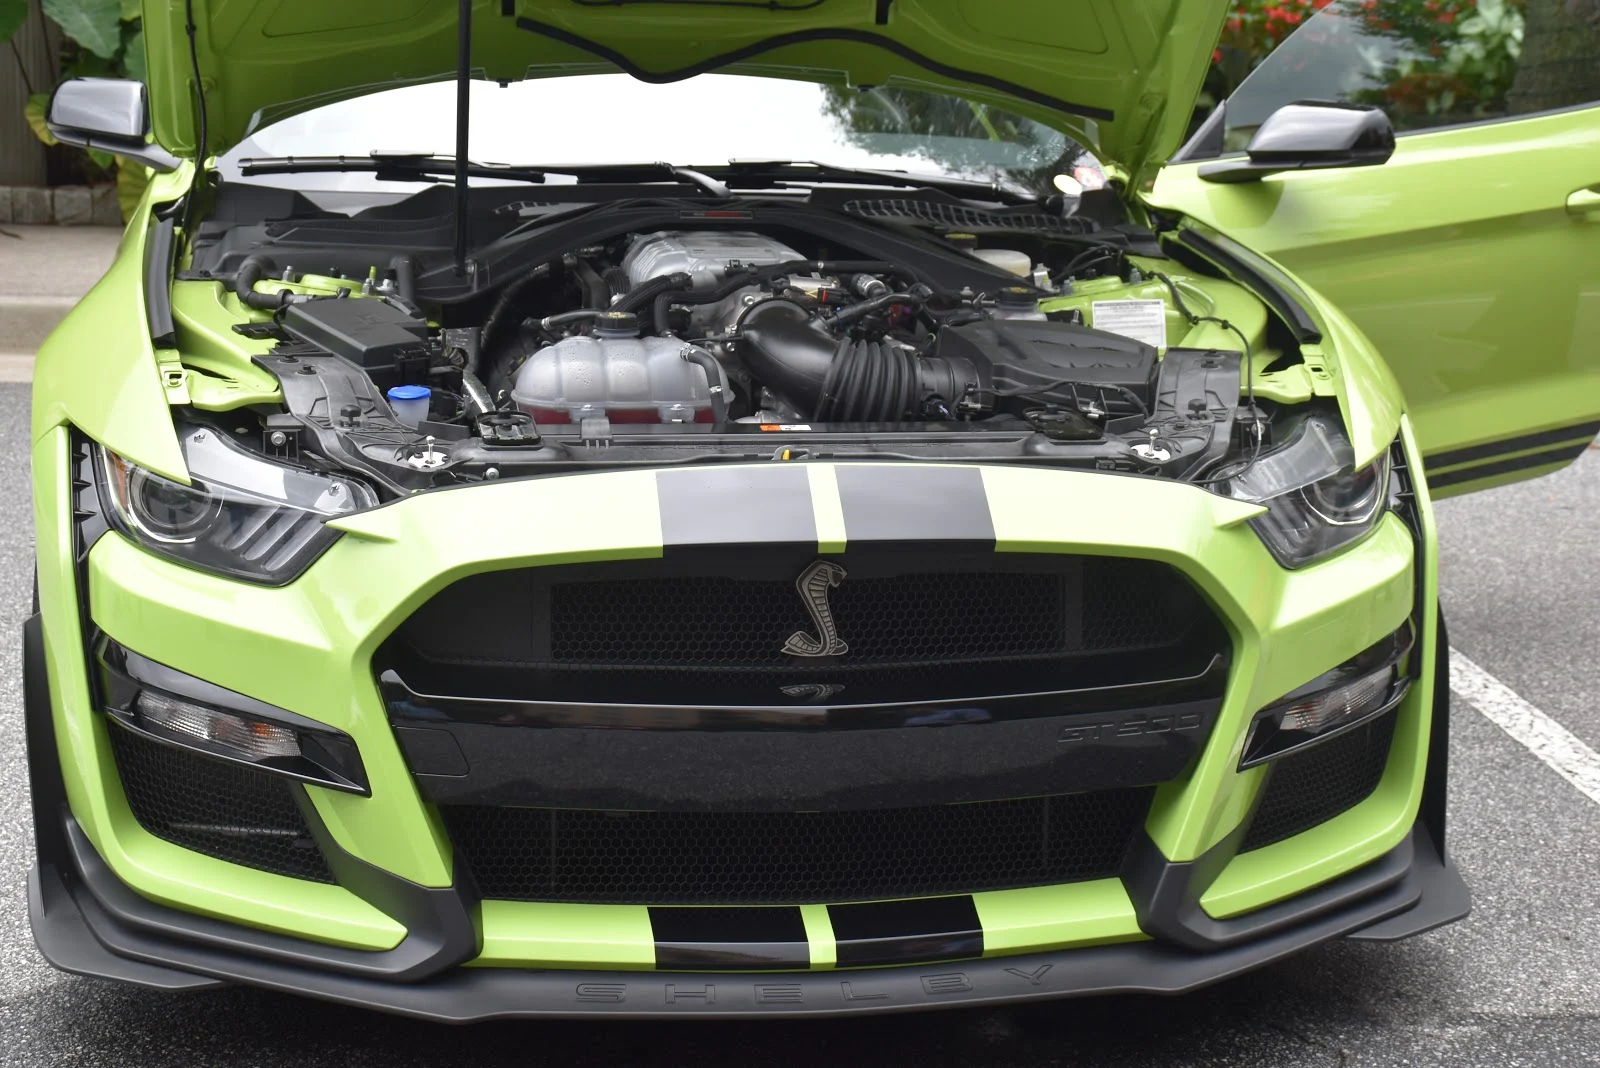 See How I Celebrated Ford Mustang's 55th Anniversary